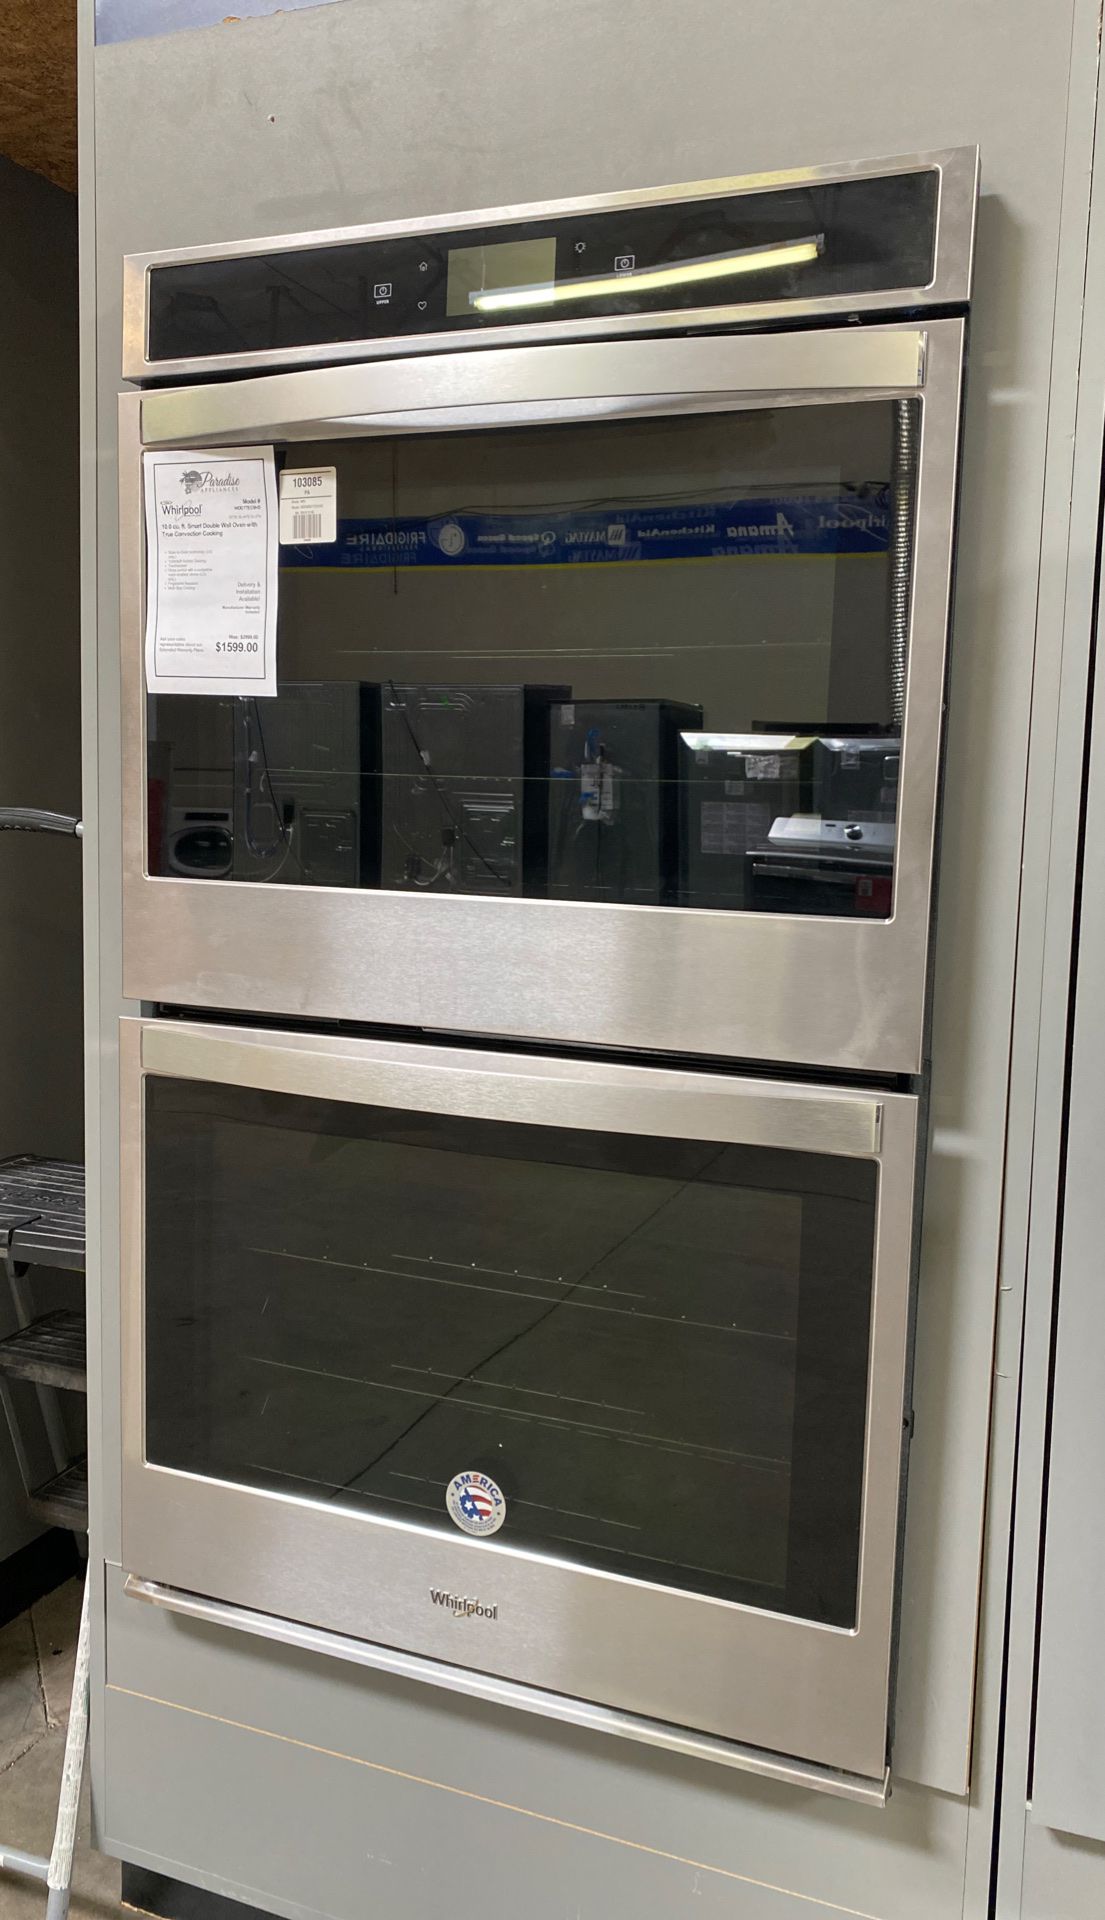 New Whirlpool 30" Double Wall Oven w/ Convection 🔥